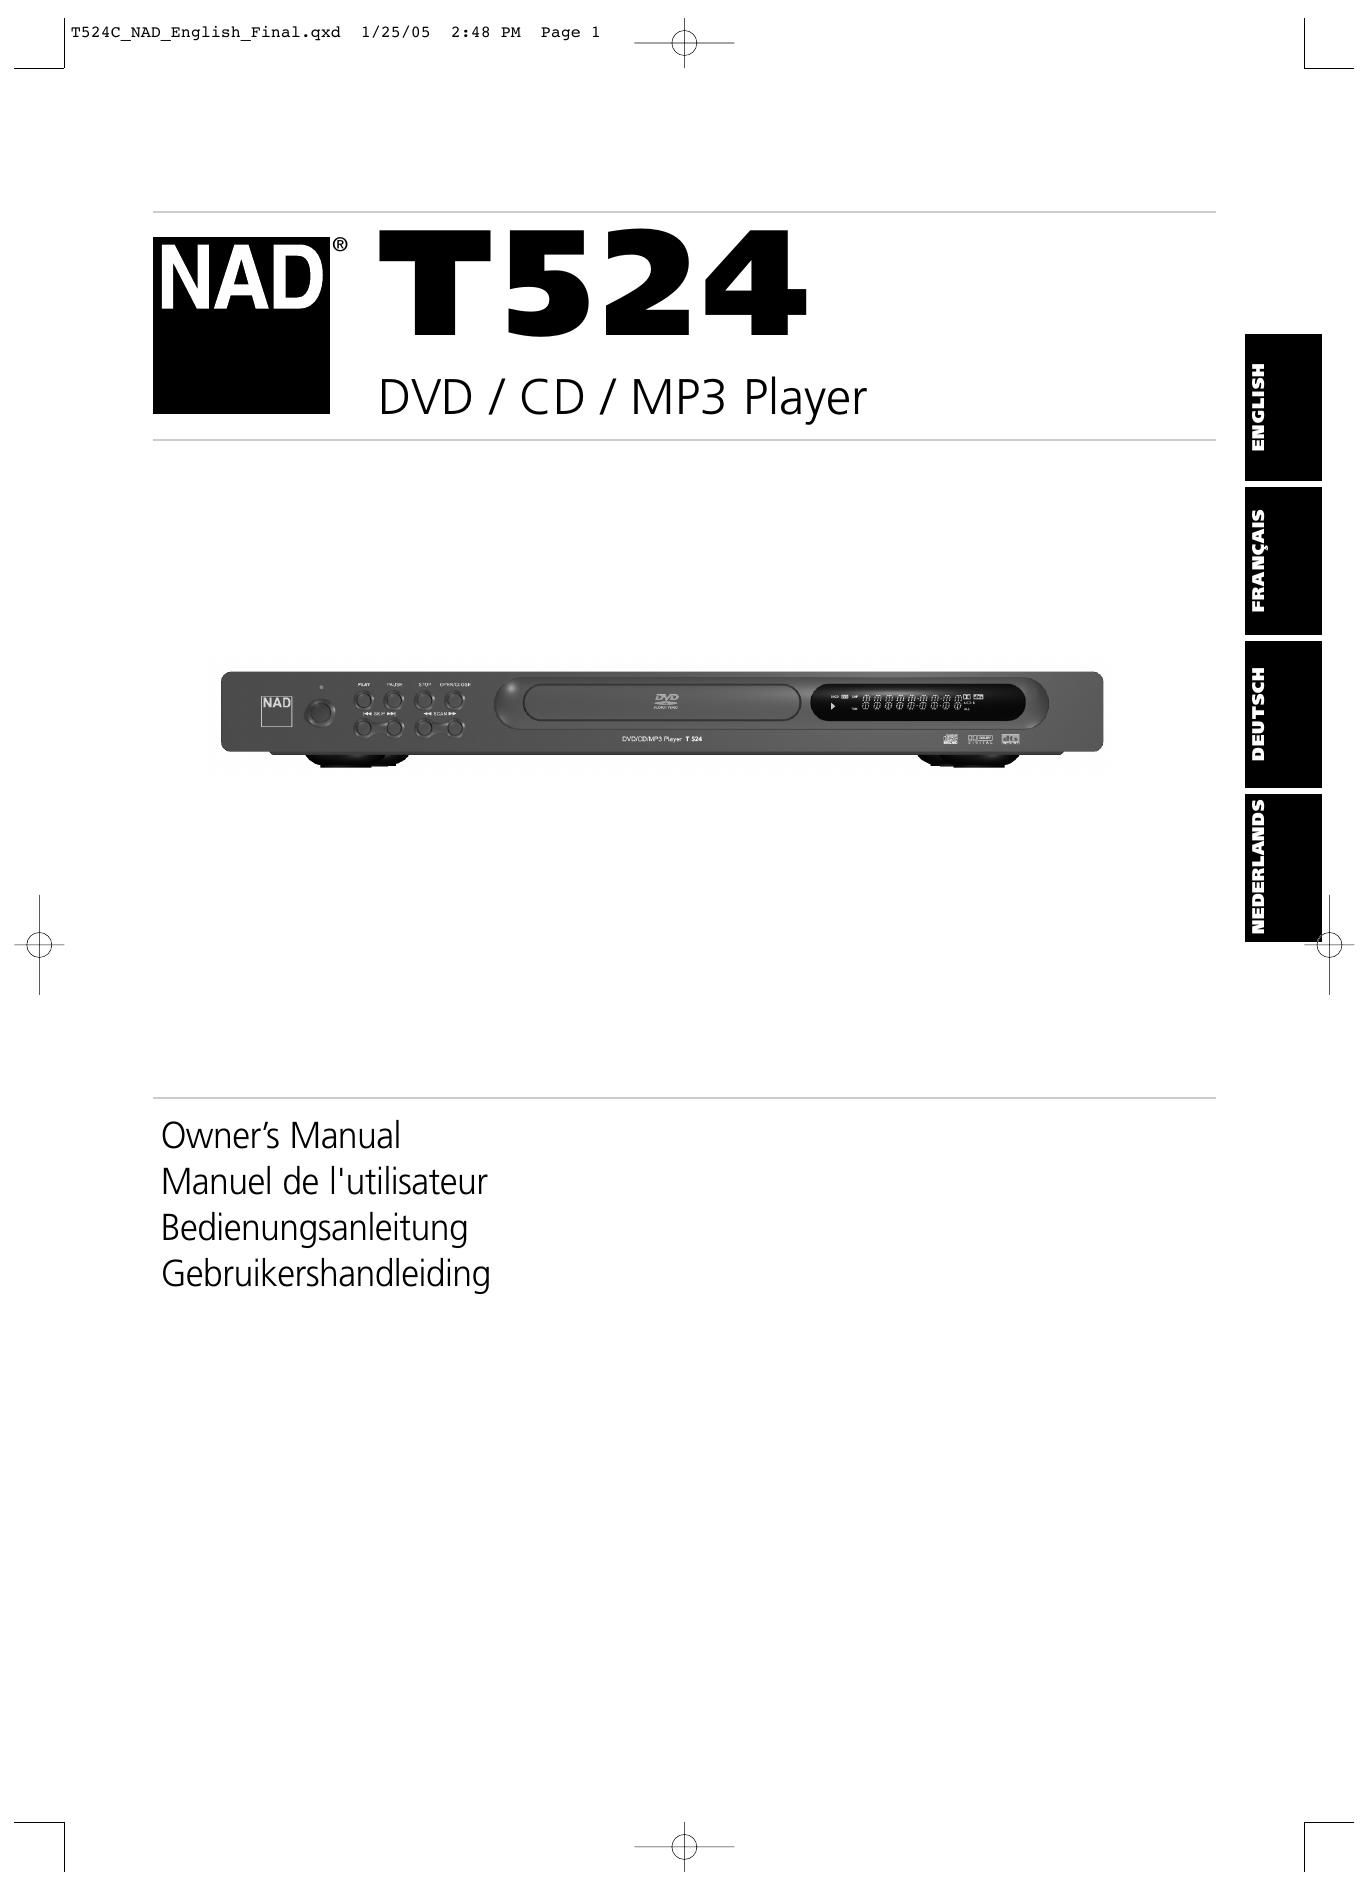 Nad T 524 Owners Manual 2